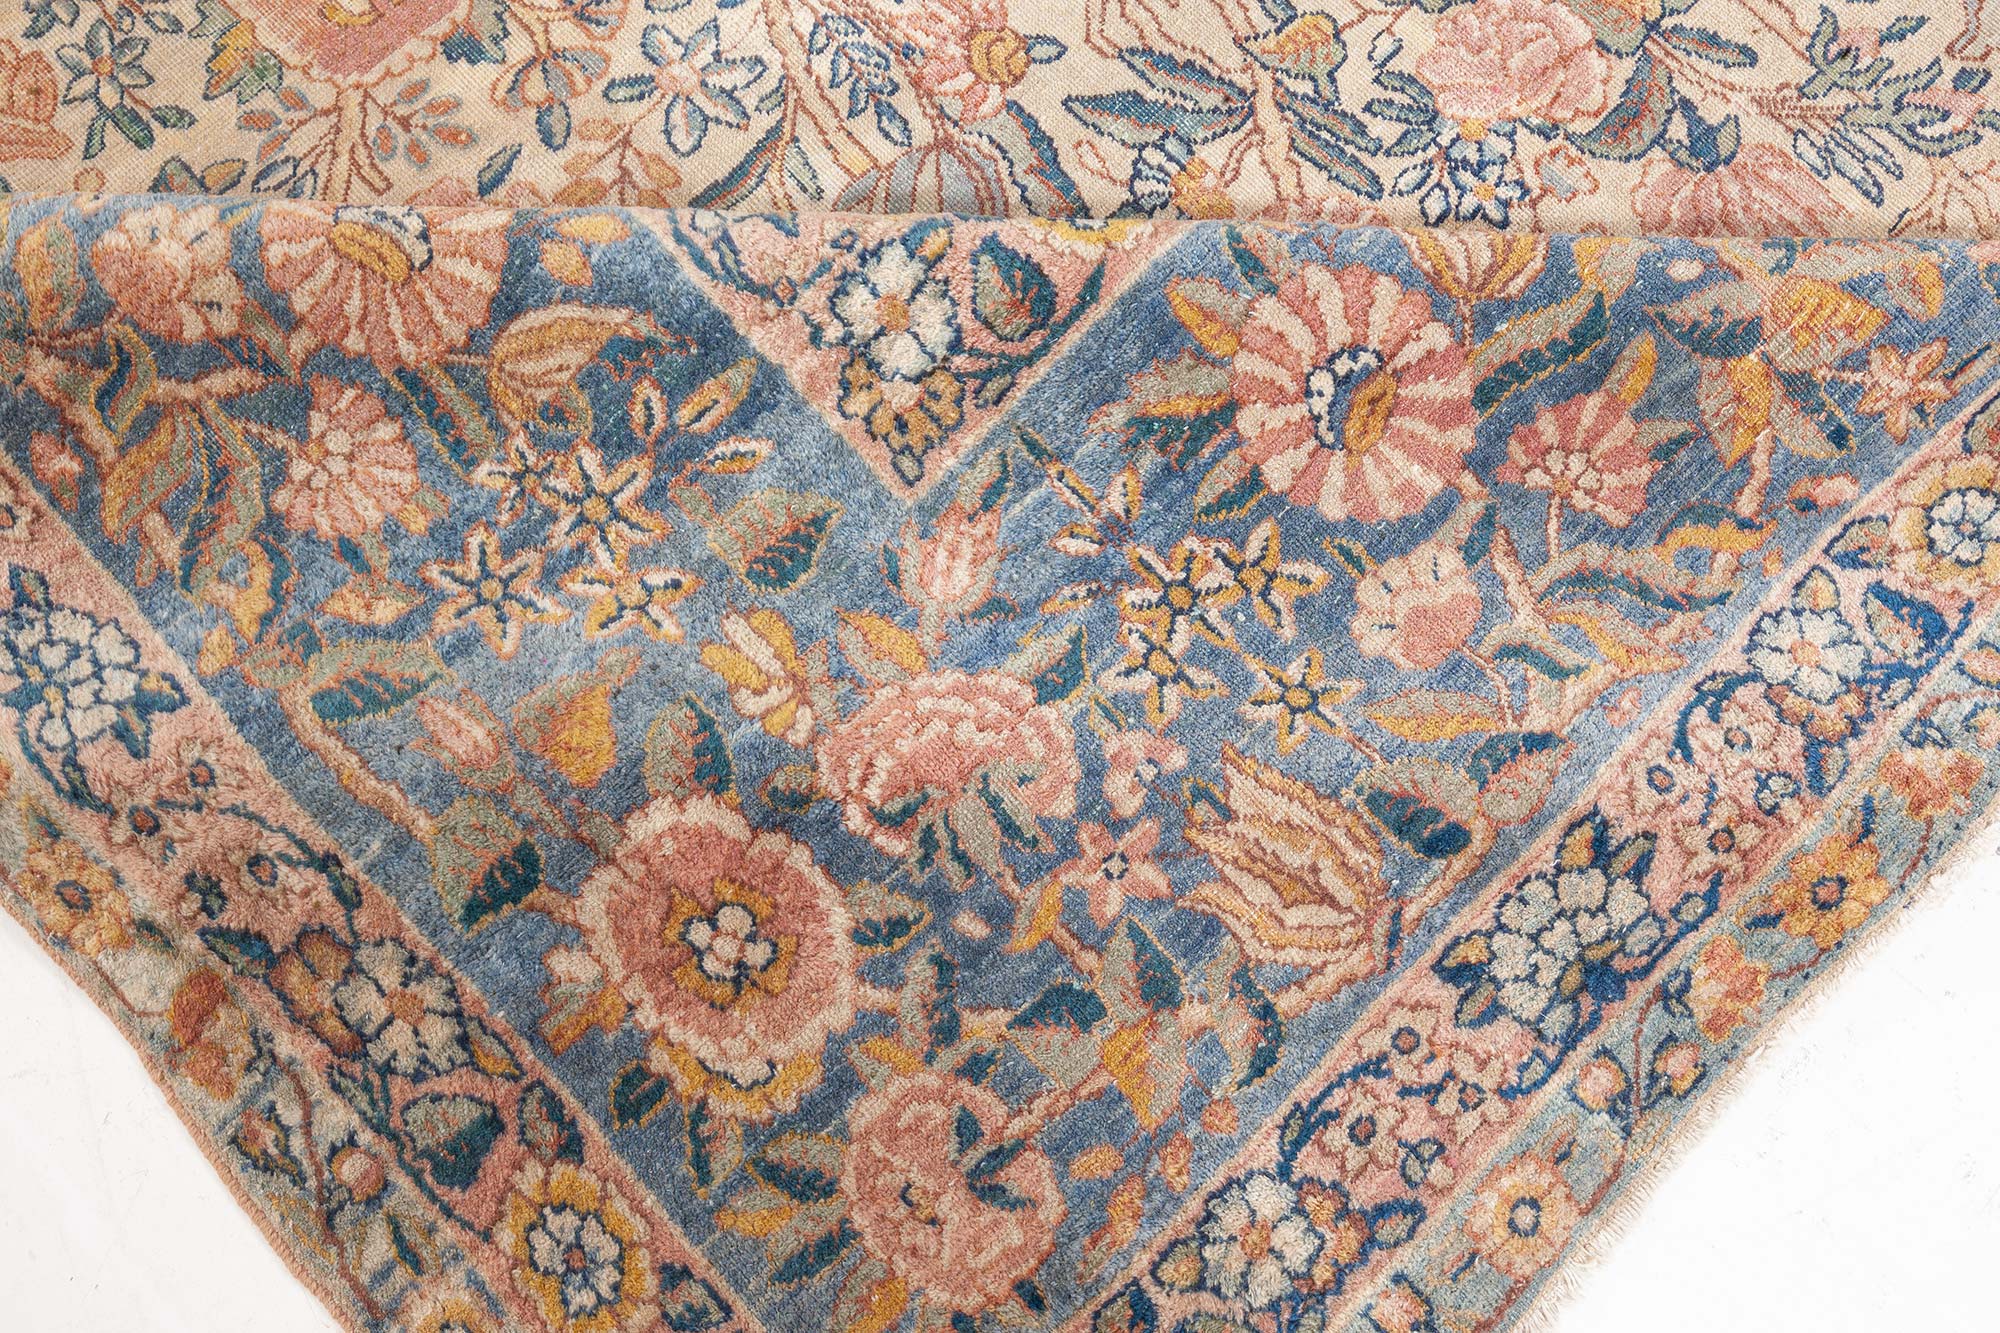 19th Century Persian Kirman Floral Handwoven Wool Rug BB7124 by DLB